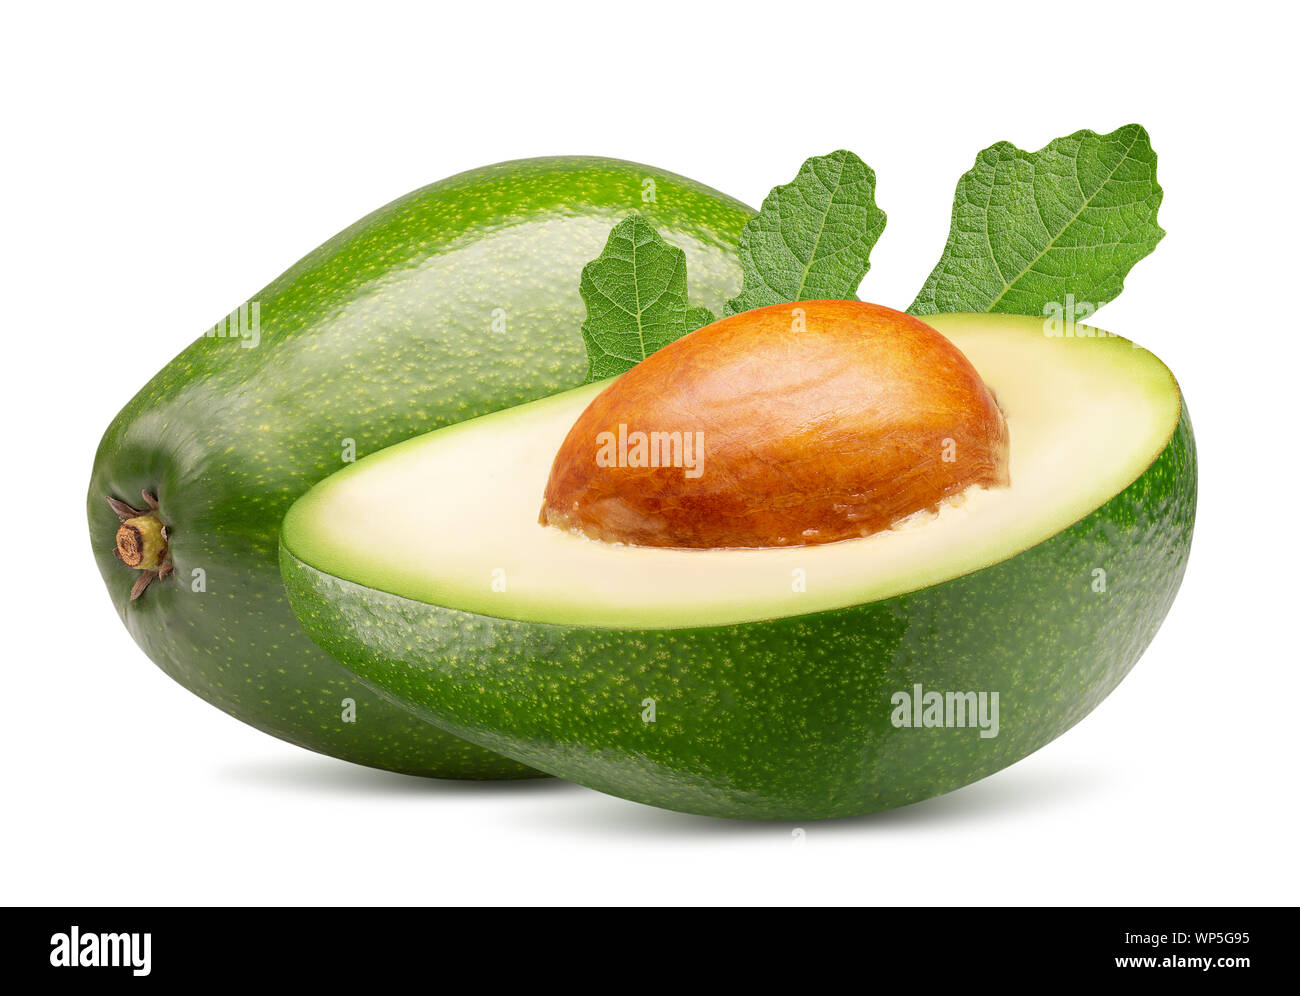 avocado with half of avocado and leaf isolated on a white background. Stock Photo